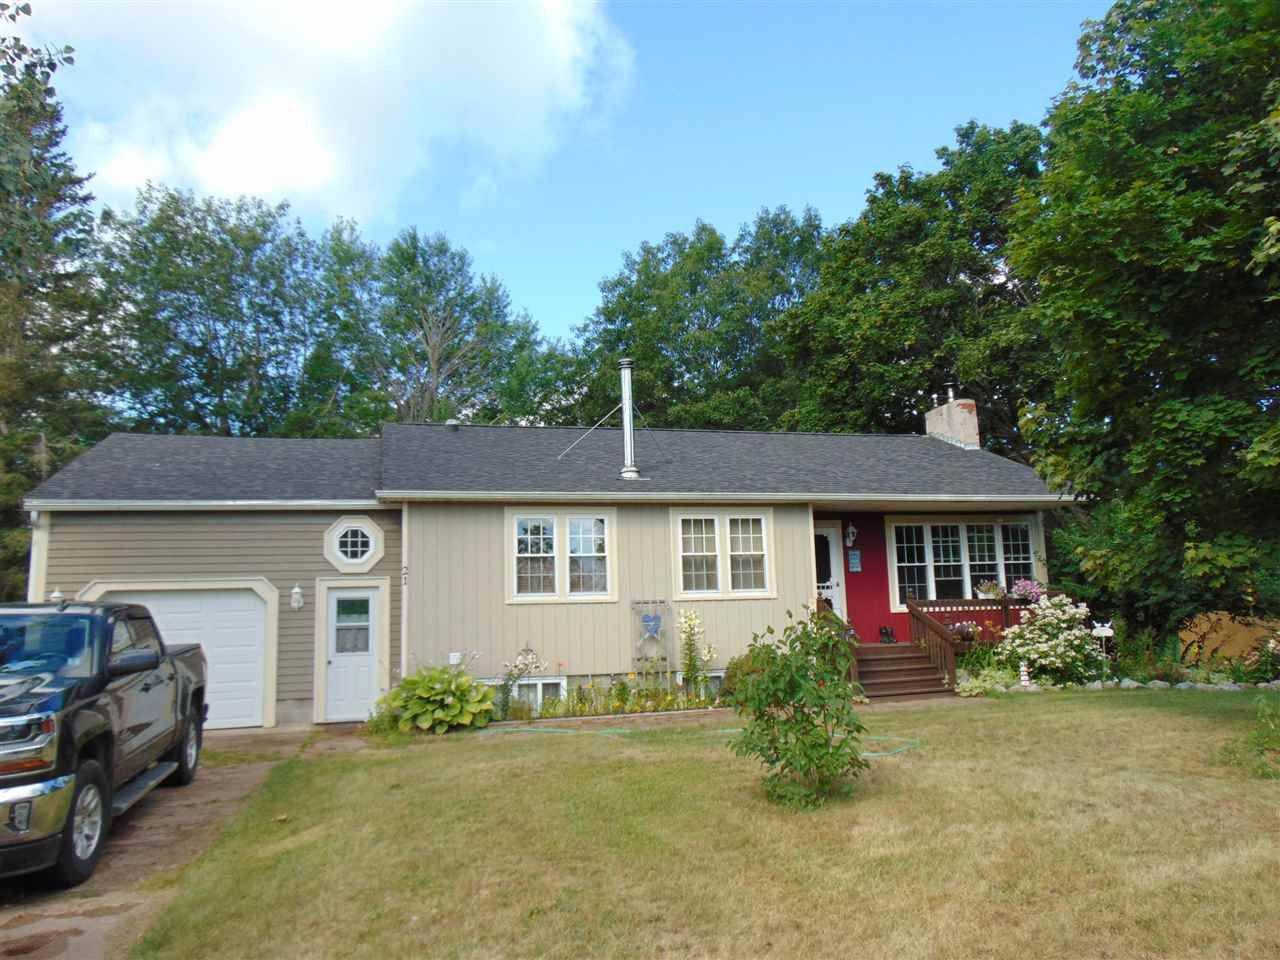 Main Photo: 21 Brockville Street in East Kingston: 404-Kings County Residential for sale (Annapolis Valley)  : MLS®# 202015777